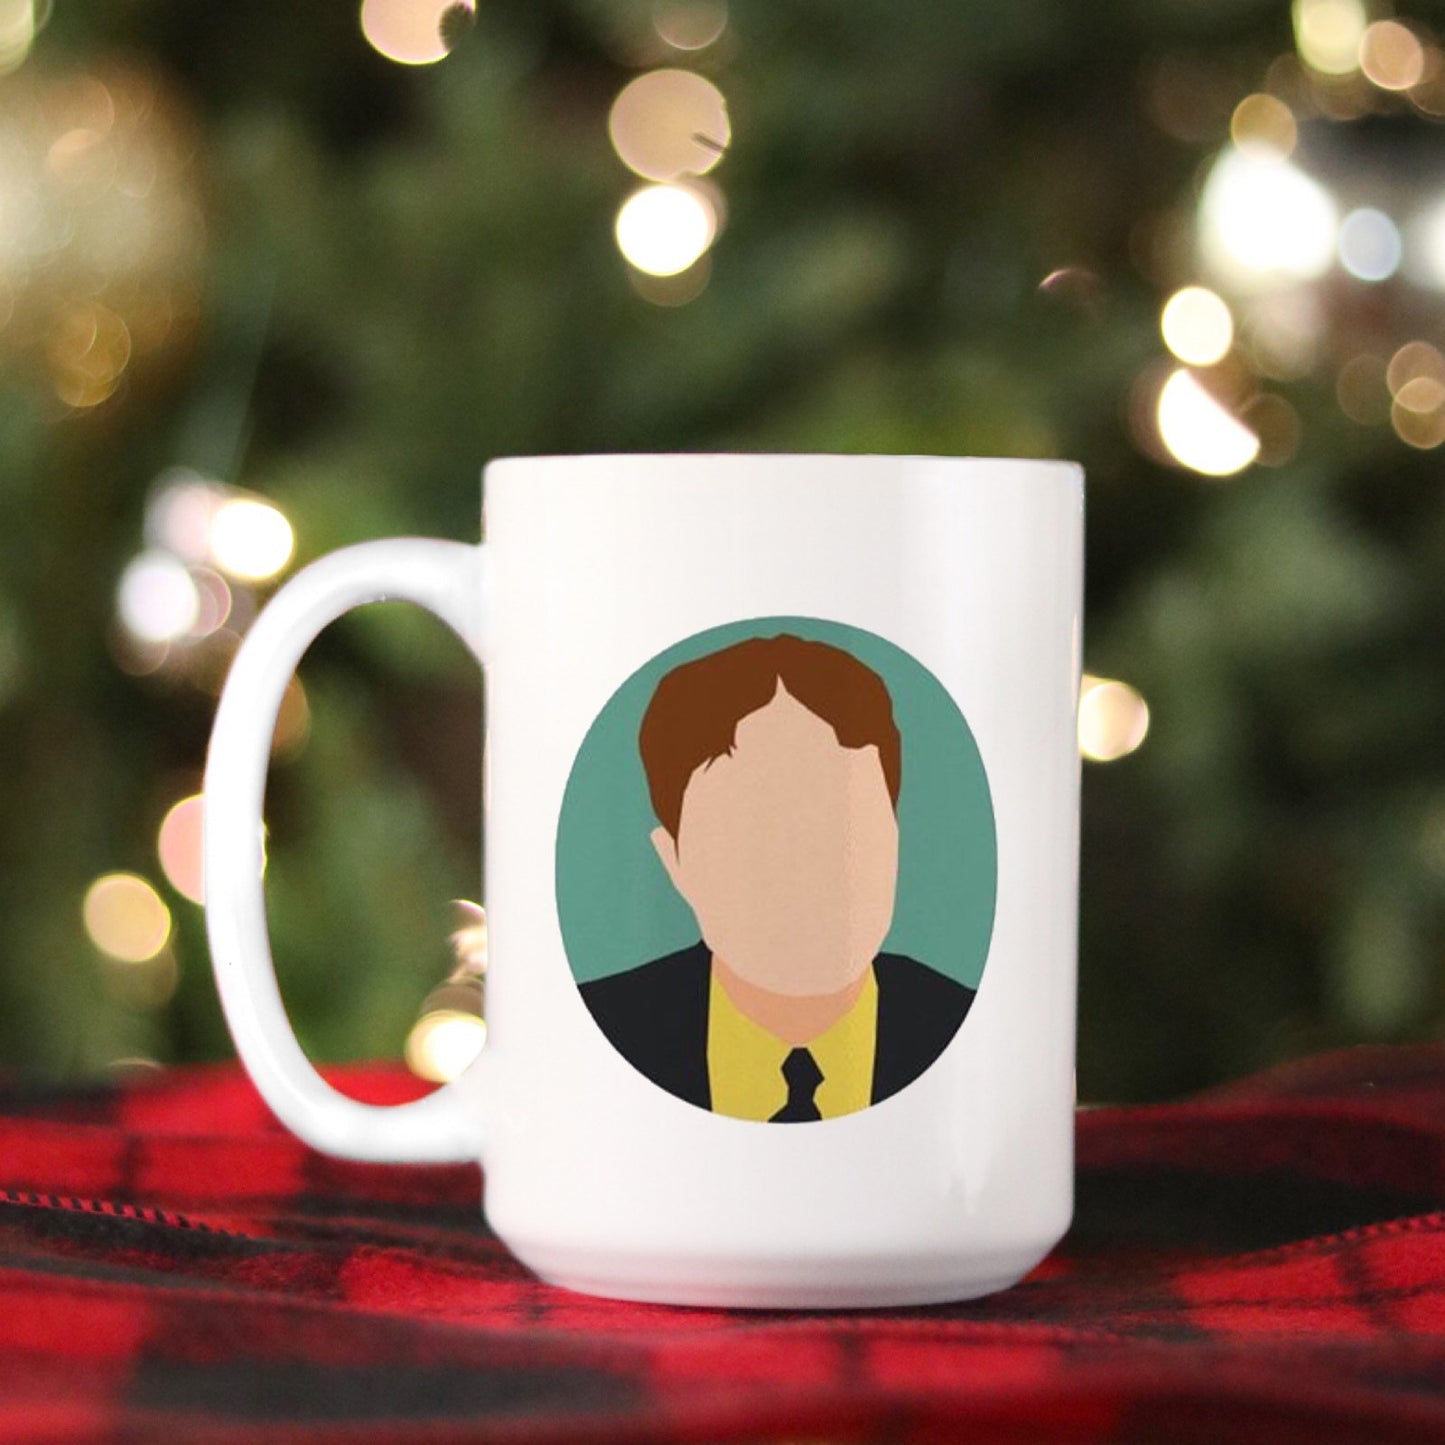 Dwight Schrute ceramic mug for fans of The Office tv show